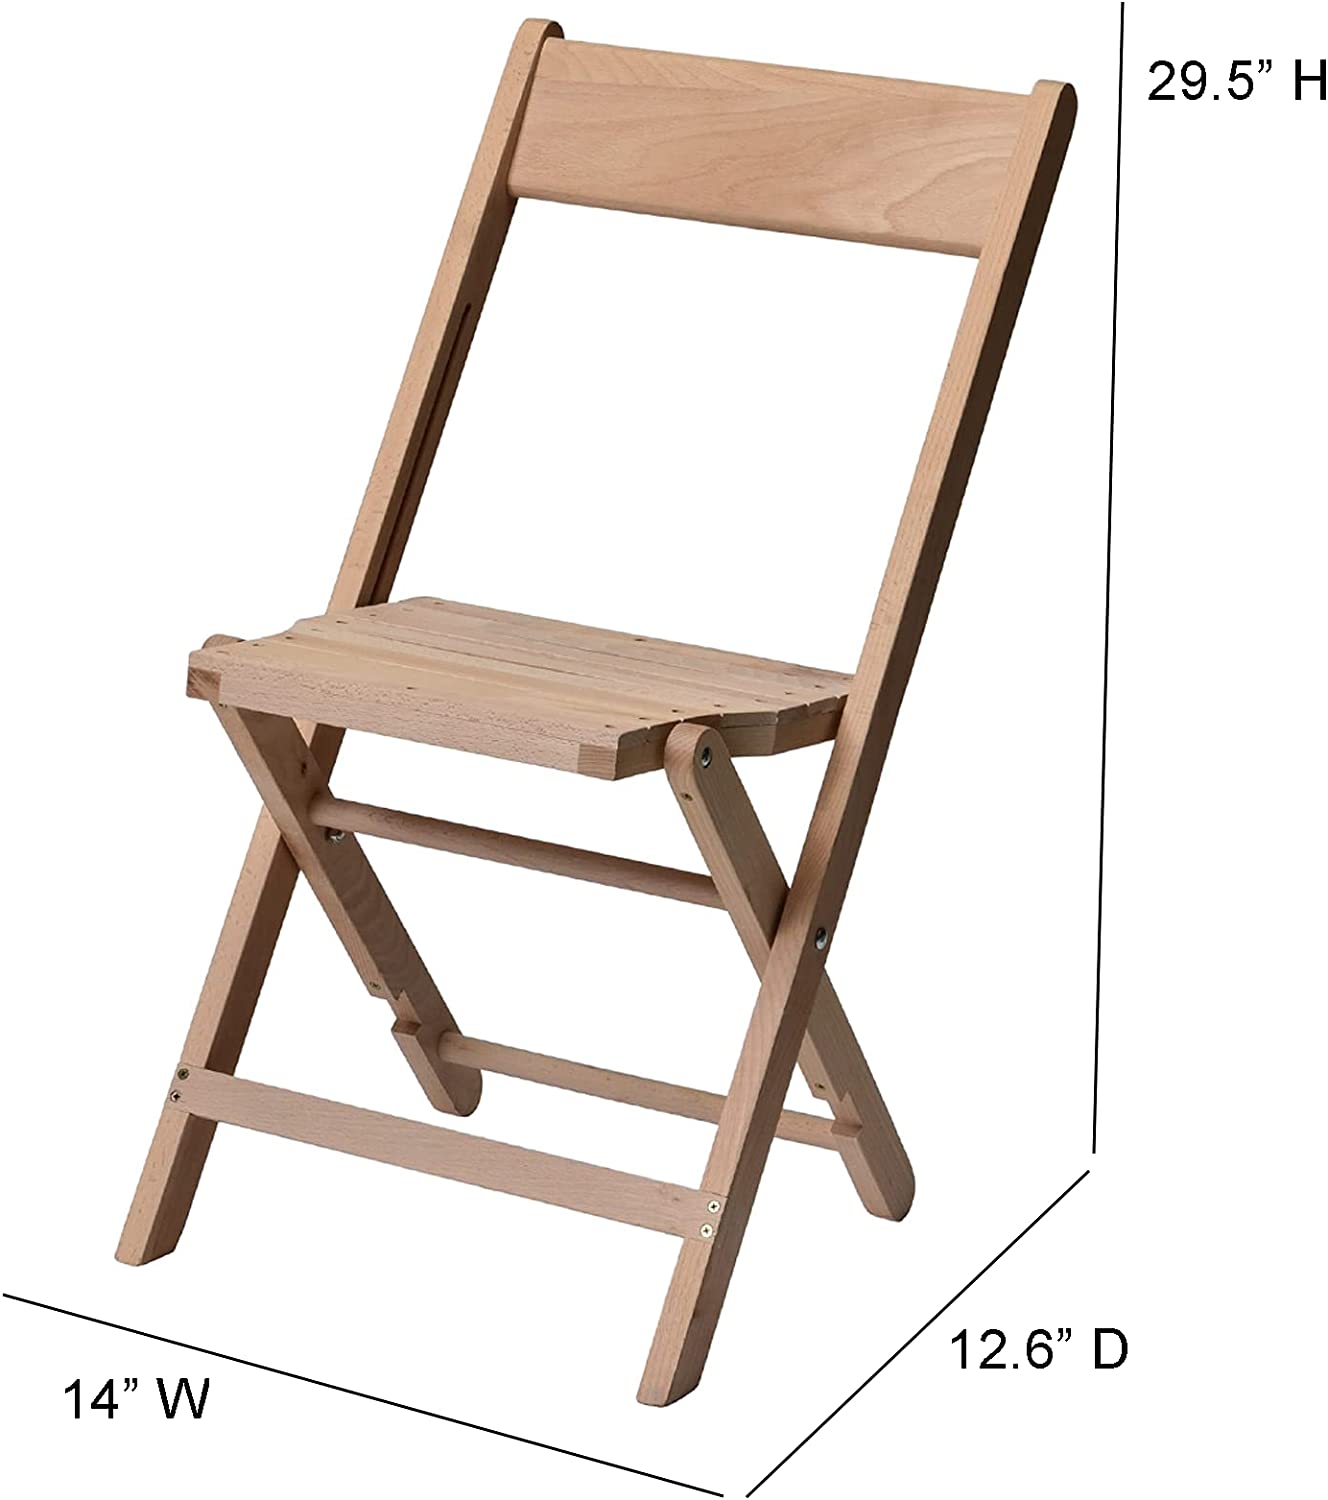 Commercial Seating Products American Padded Folding Chairs, Raw